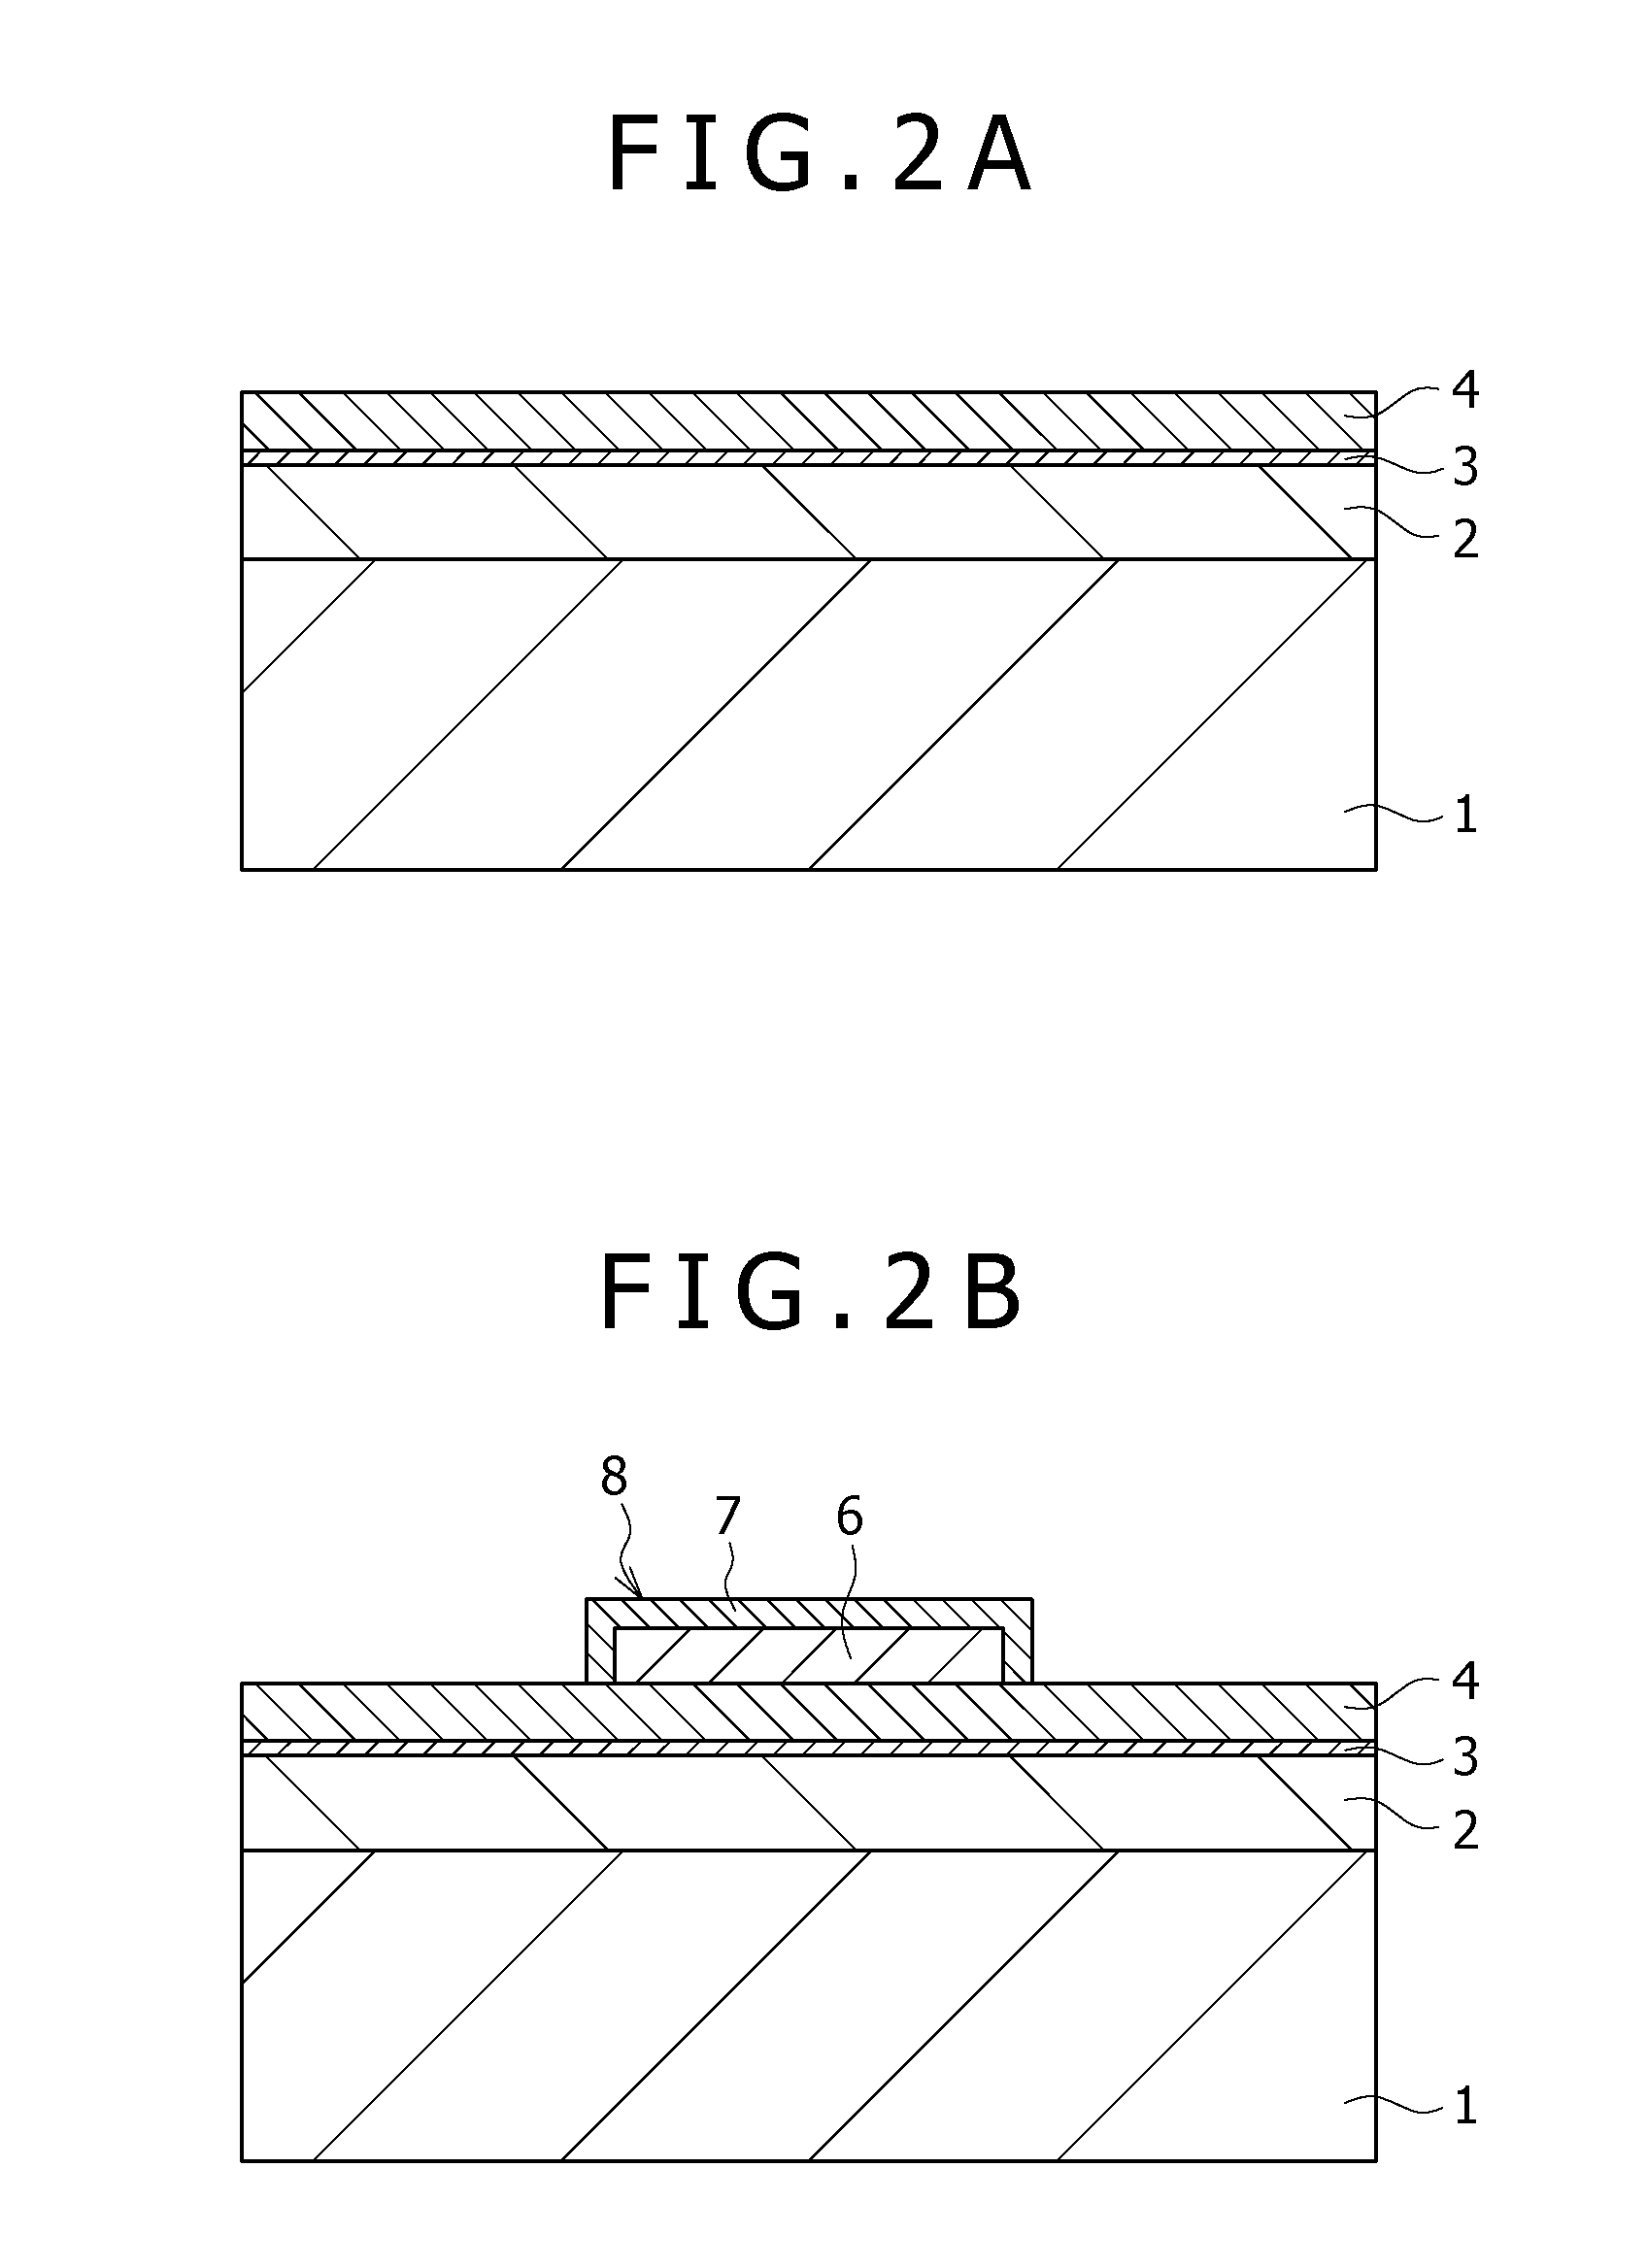 Light emitting diode, method for manufacturing light emitting diode, integrated light emitting diode, method for manufacturing integrated light emitting diode, light emitting diode backlight, light emitting diode illumination device, light emitting diode display, electronic apparatus, electronic device, and method for manufacturing electronic device